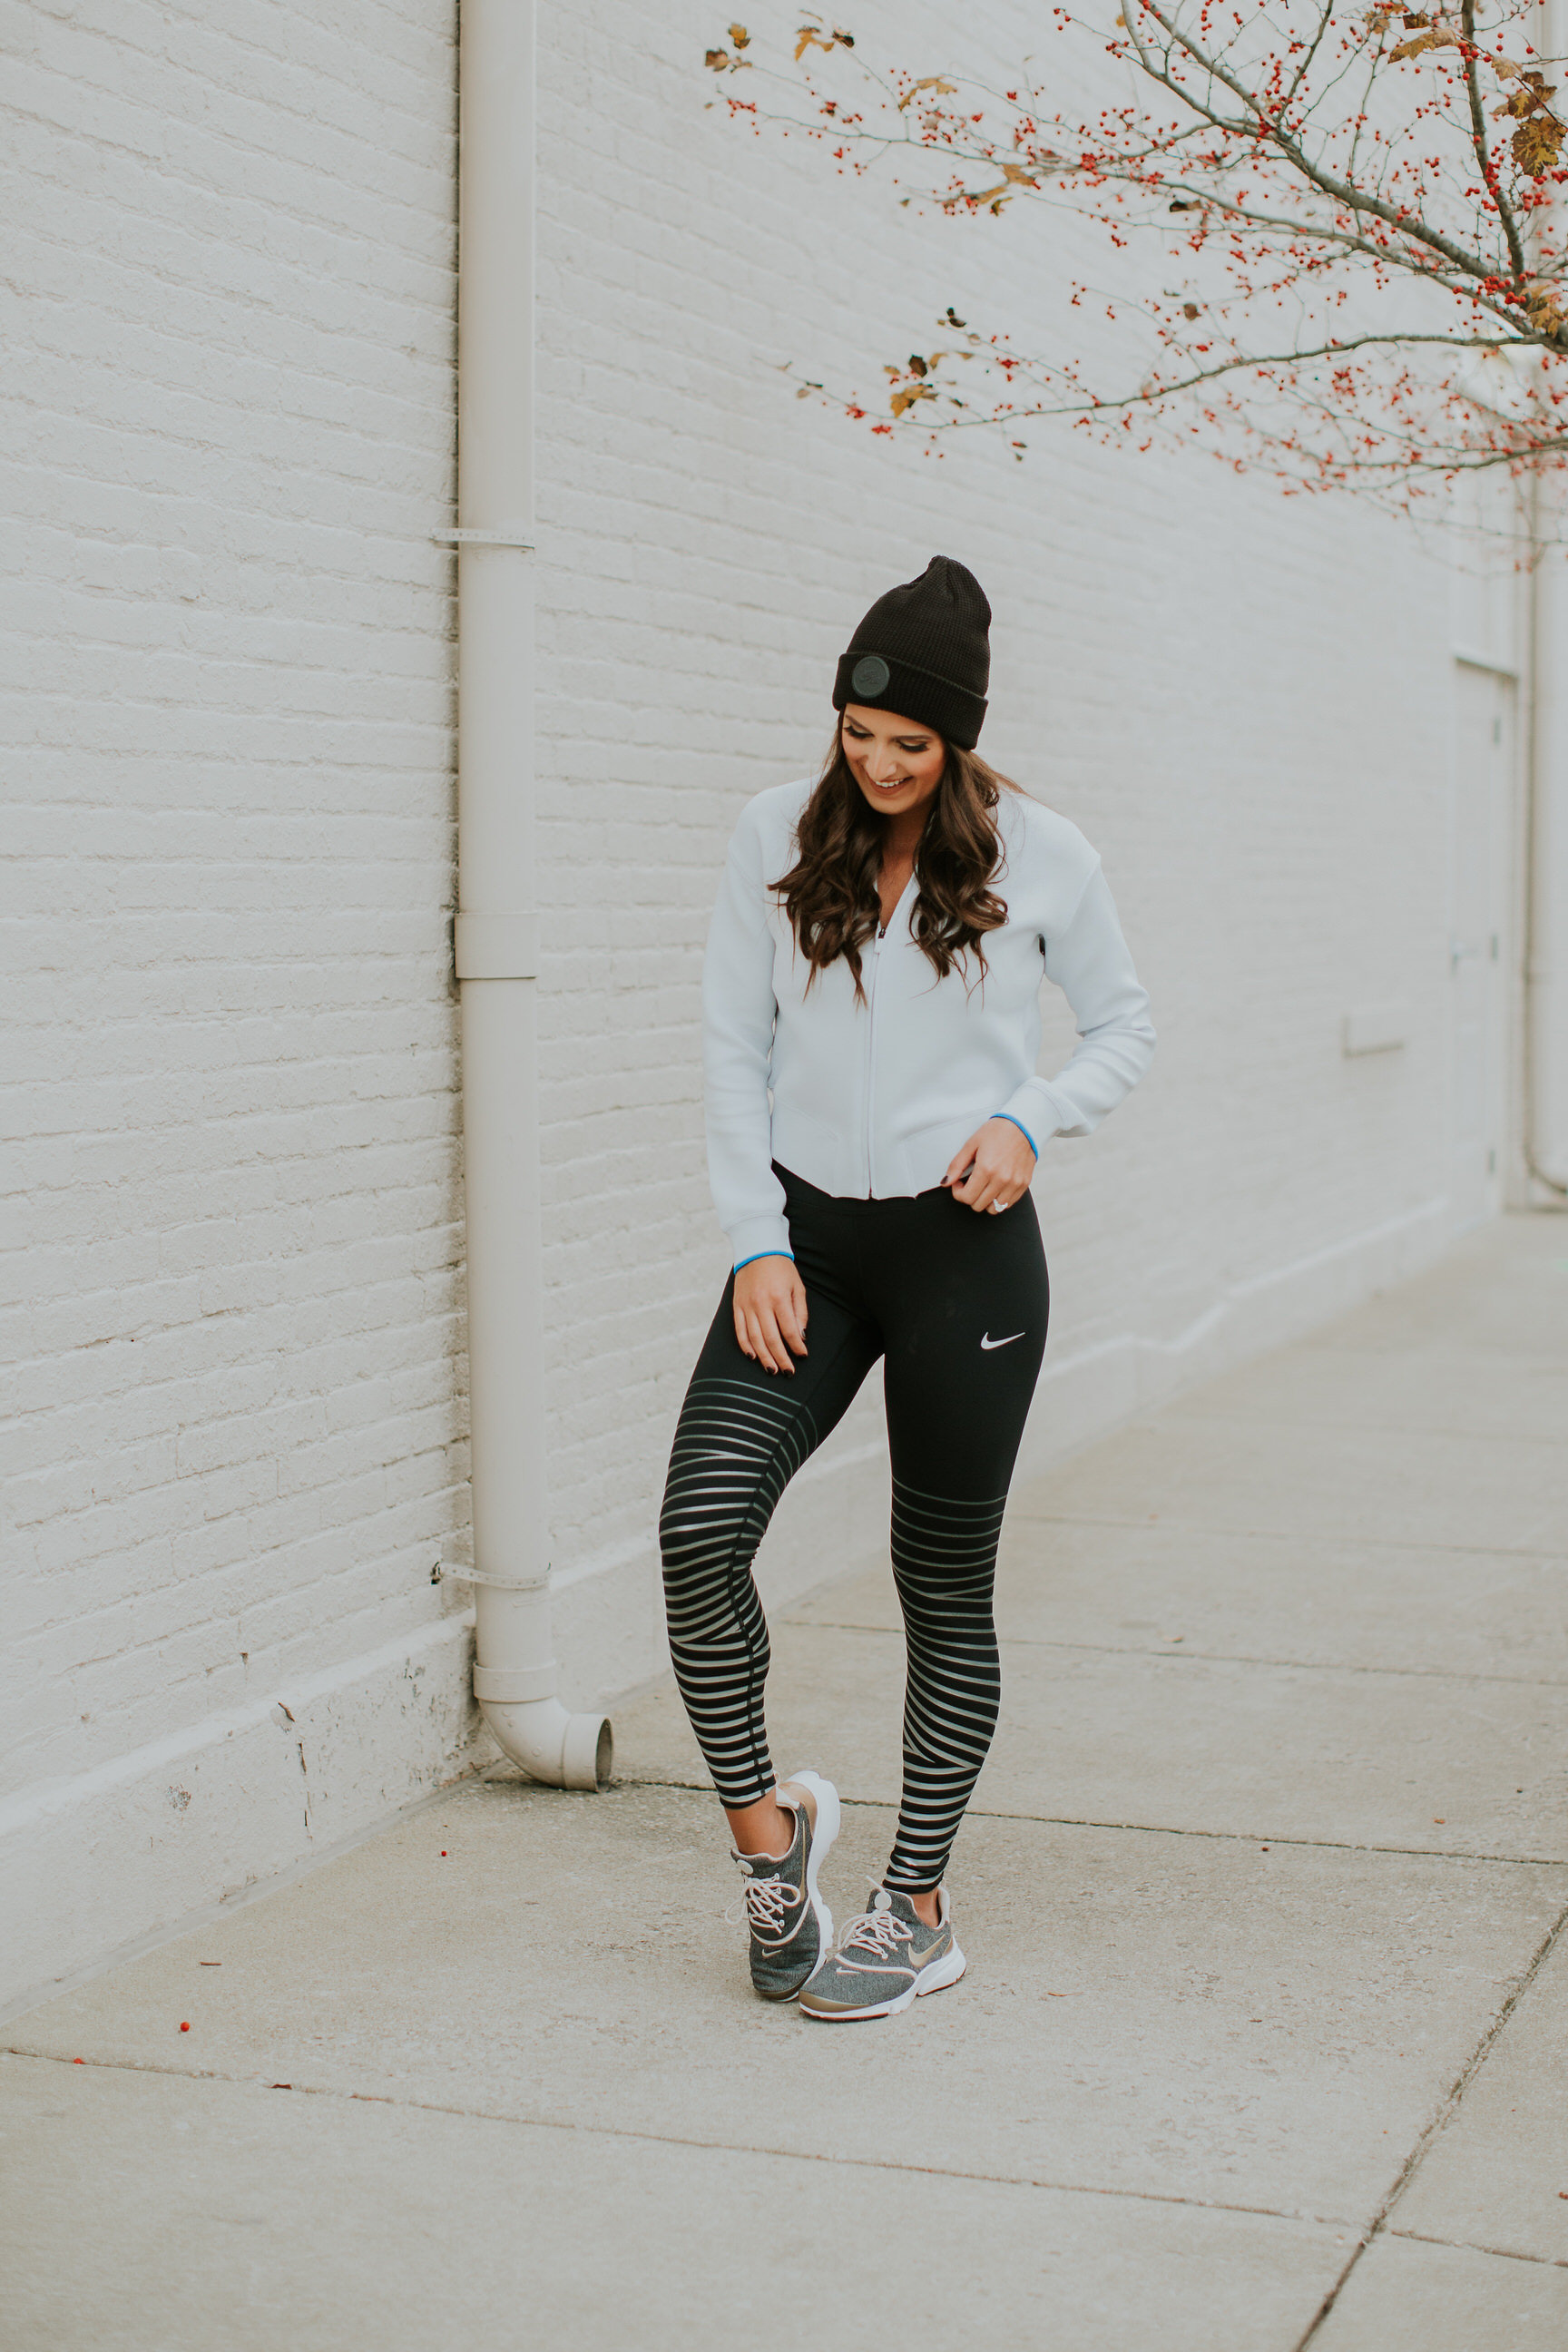 nike gift guide, nike activewear, nike air presto sneaker, nike holiday gift guide, christmas gift guide, nike beanie, nike hat, nike jacket, nike epic lux leggings, nike athleisure, a southern drawl fitness, fitspiration, leg workout guide // grace wainwright a southern drawl